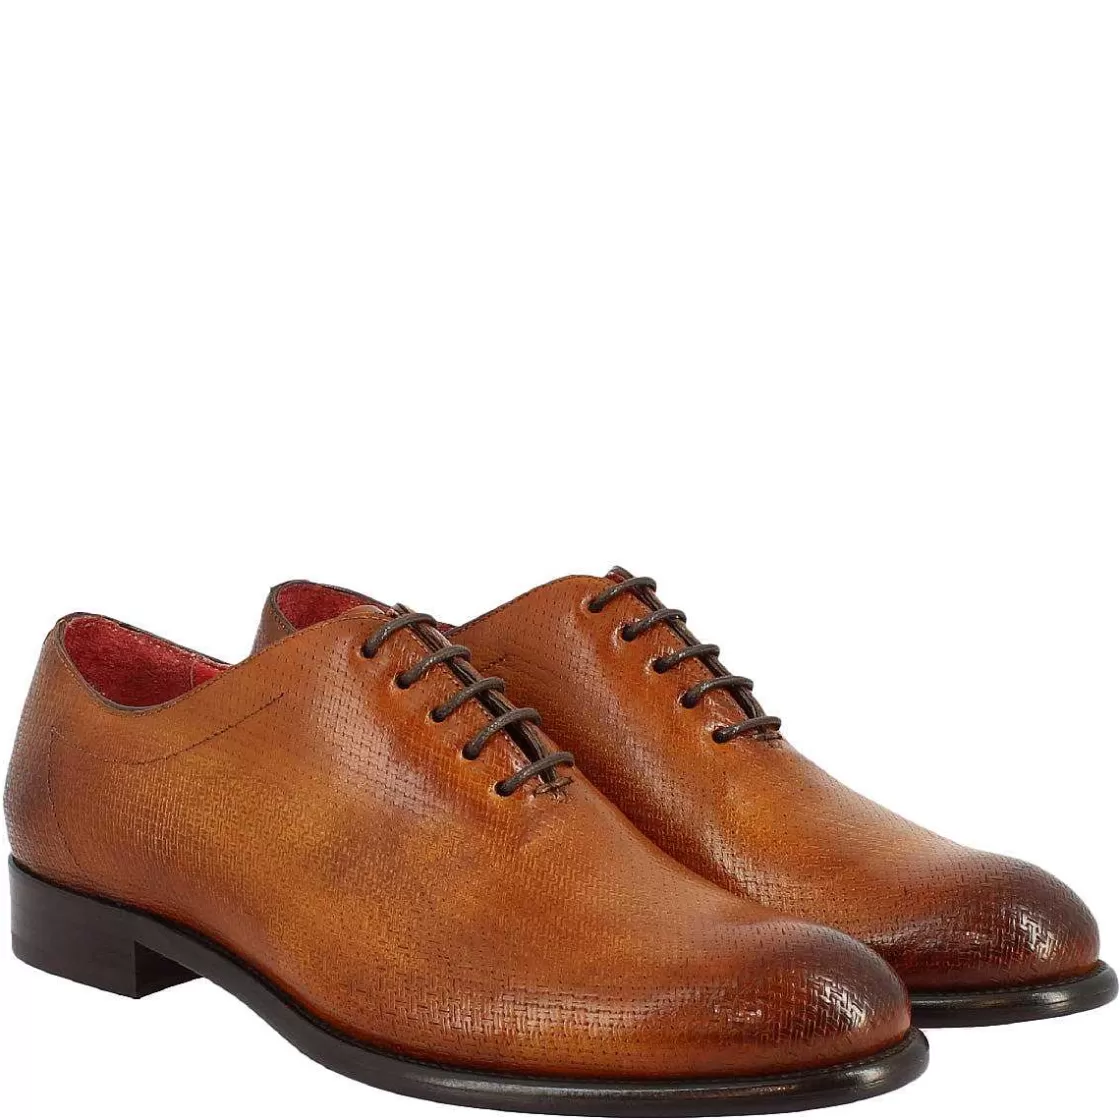 Leonardo Men'S Brogues Shoes With Rounded Toe Handmade In Siena Montecarlo Calf Leather Shop